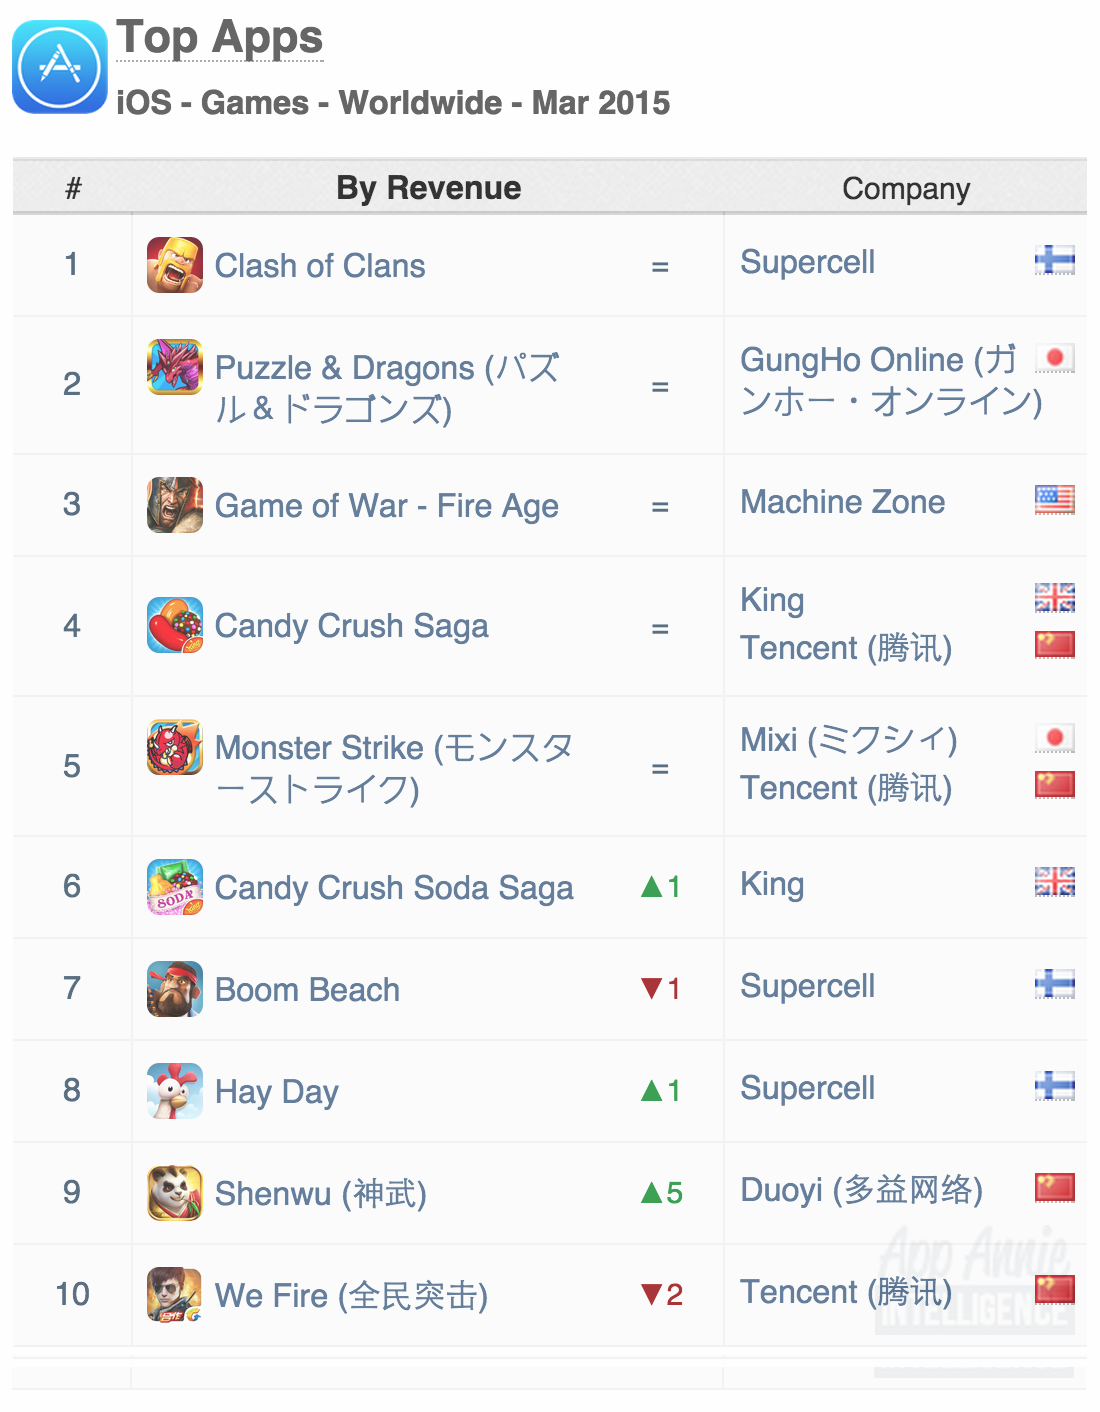 Top Apps iOS Games Worldwide March 2015